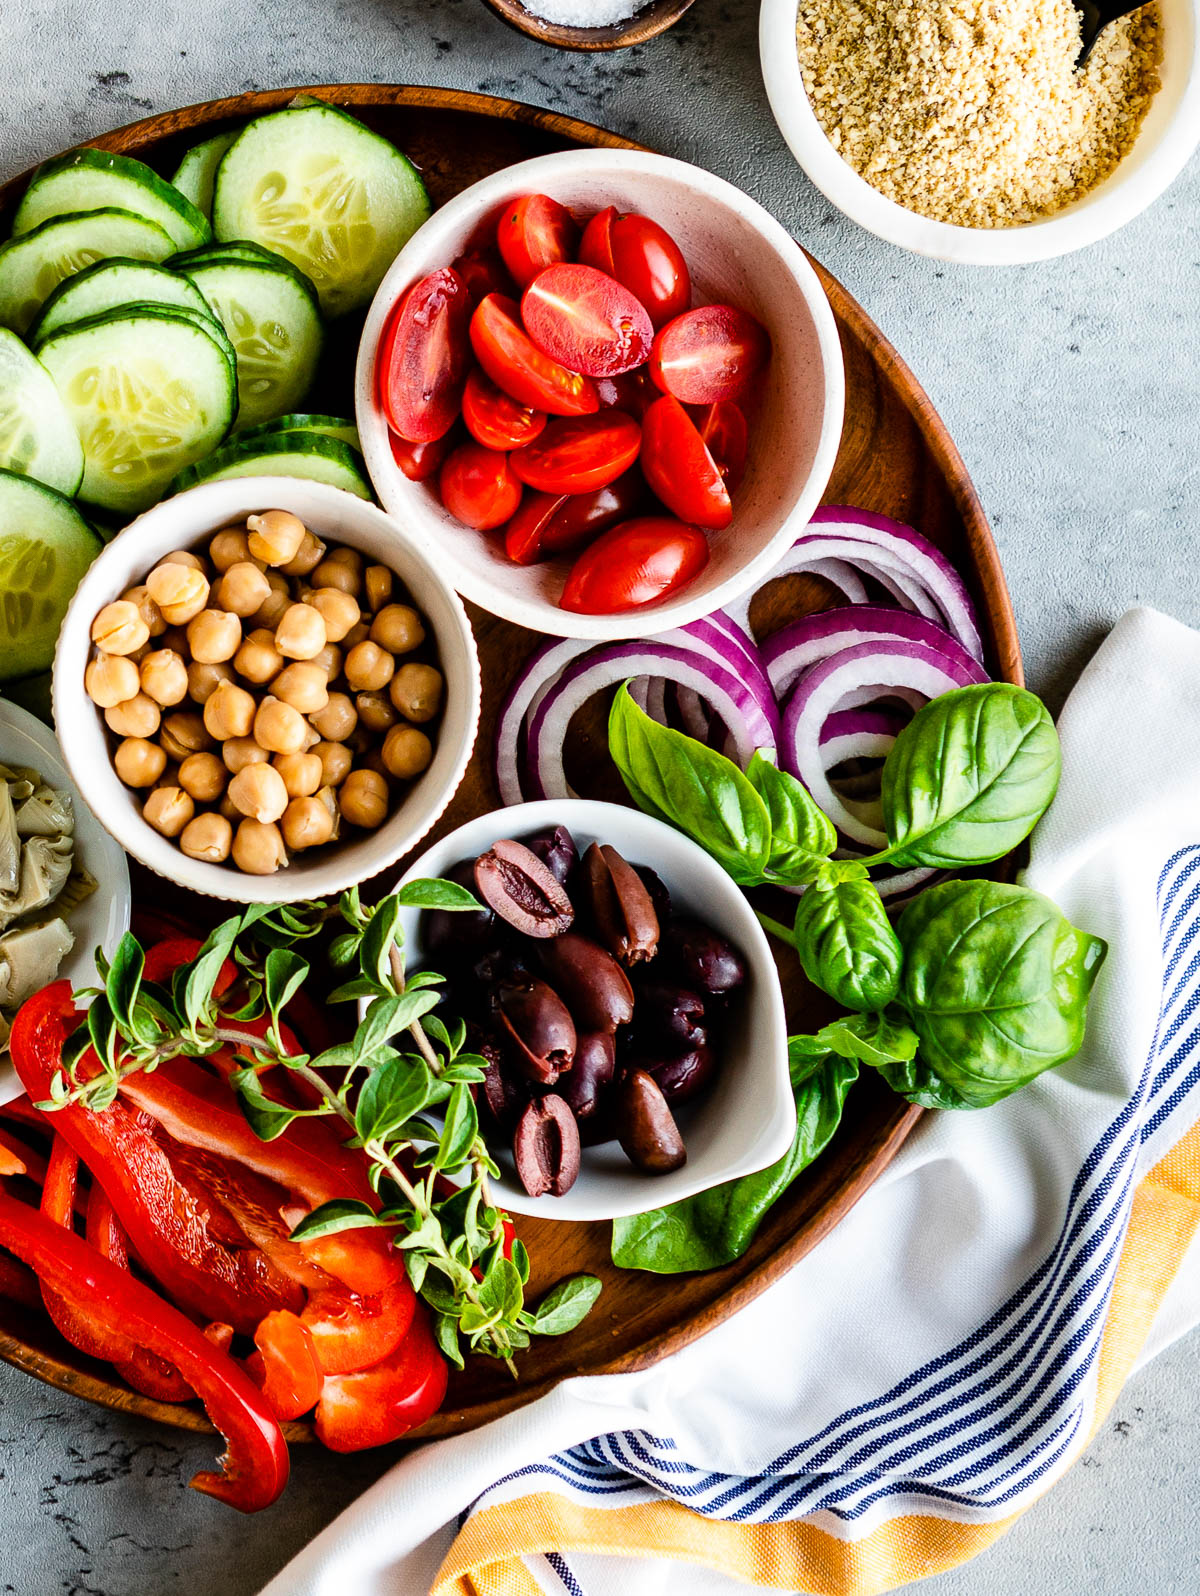 small white bowls of tomatoes, chickpeas and olives along with other gatherings of purple onion, cucumber, basil and peppers, ingredients commonly found in vegetarian Mediterranean recipes.